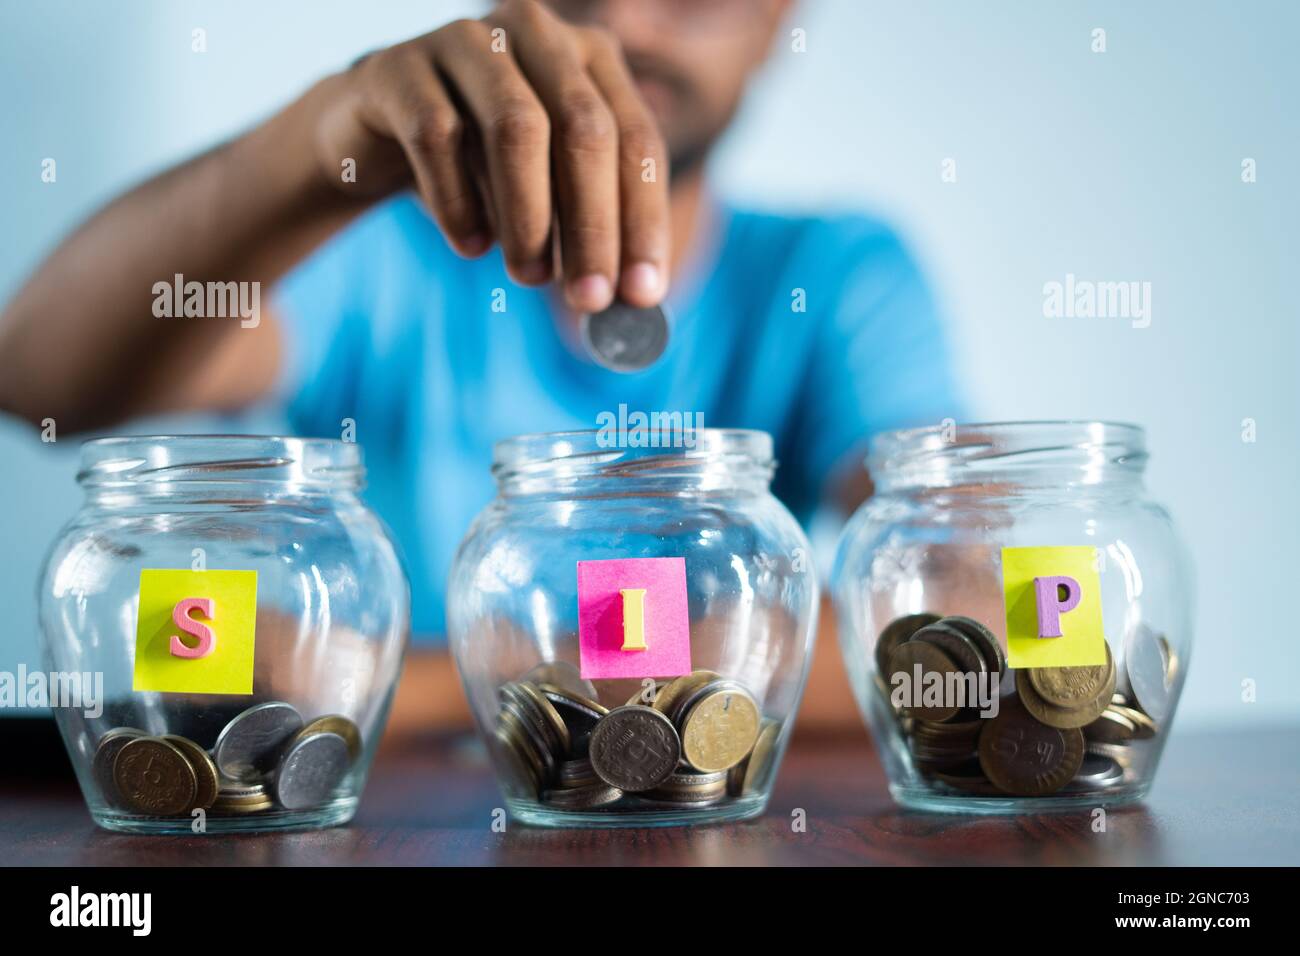 Focus on jar, Man from behind placing coins inside the jar - Concept of monthly SIP or systematic investment plan Stock Photo